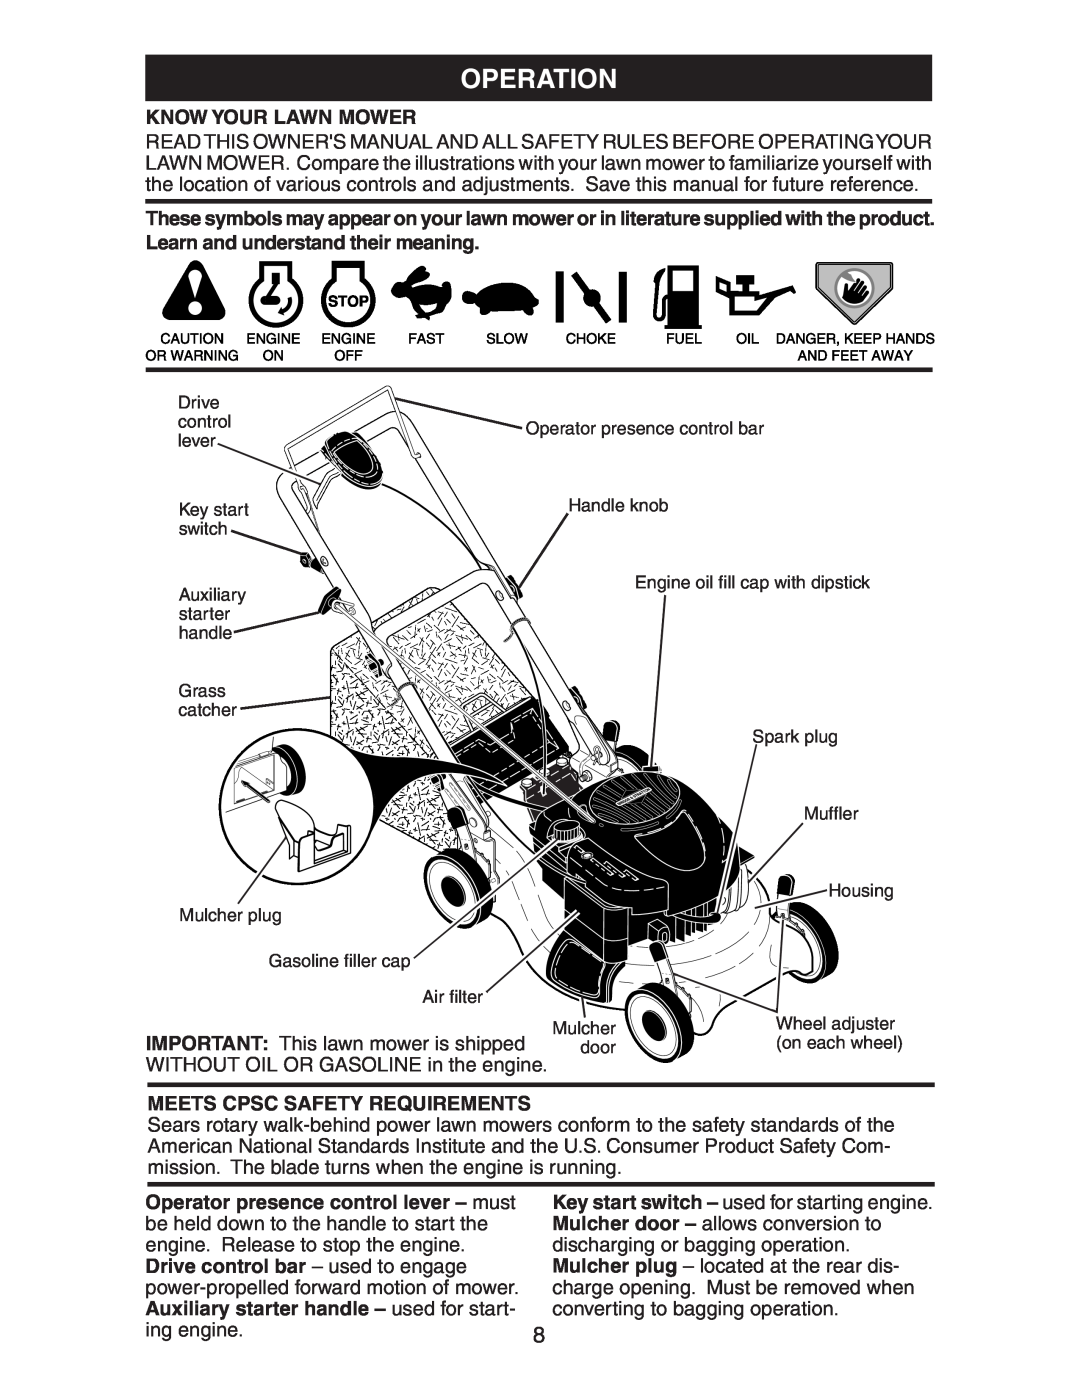 Kenmore 917.37707 owner manual Operation, Know Your Lawn Mower, Meets Cpsc Safety Requirements 